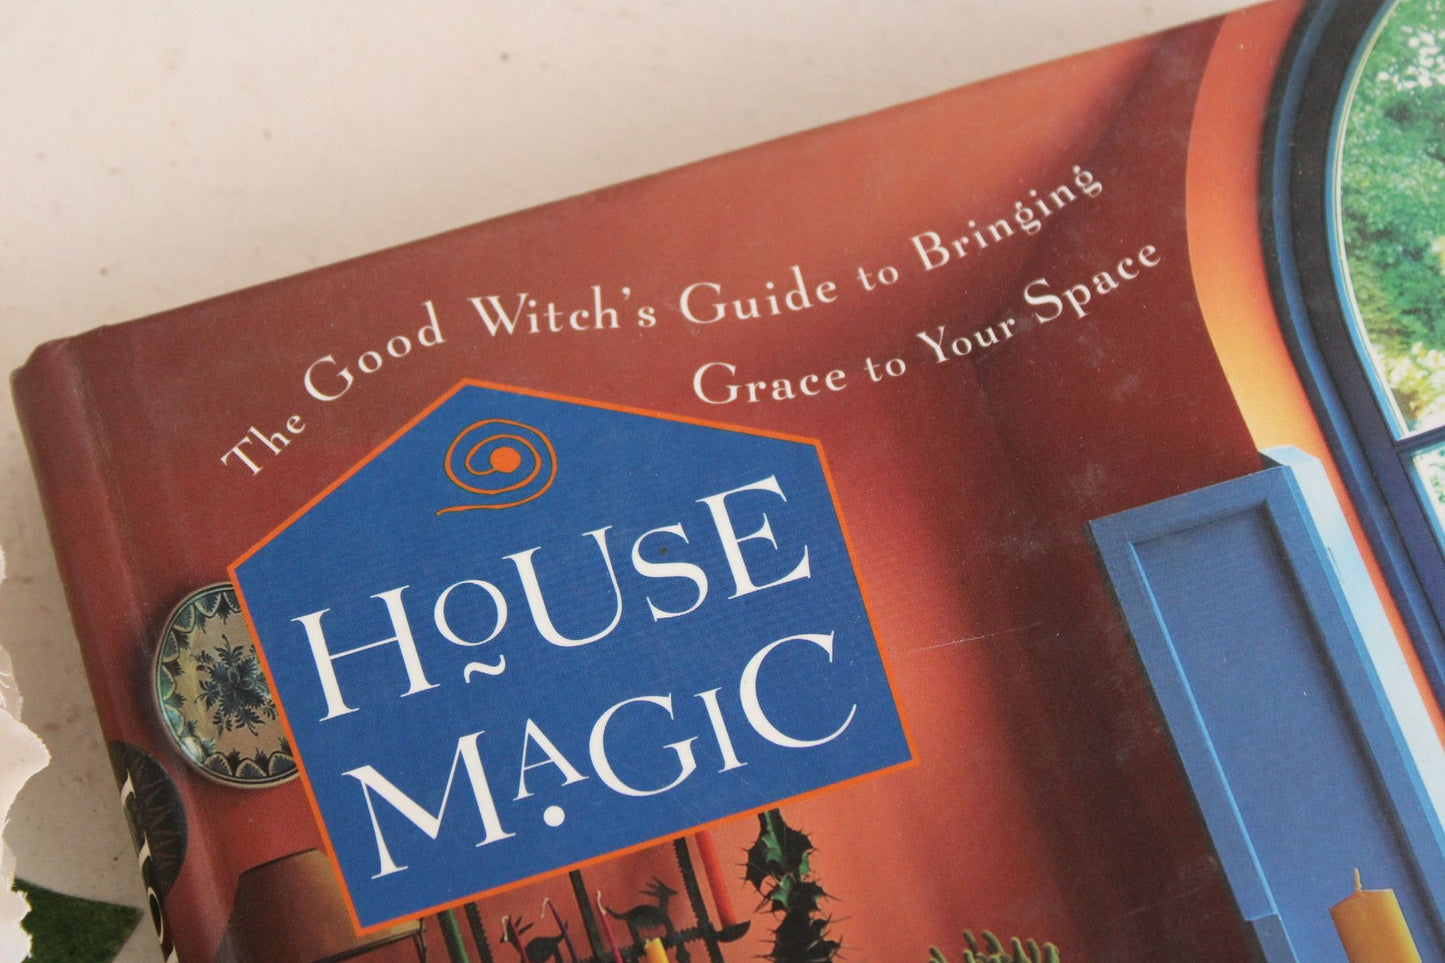 Vintage 2000s Book, "House Magic, The Good Witch's Guide to Bringing Grace to Your Space" by Ariana